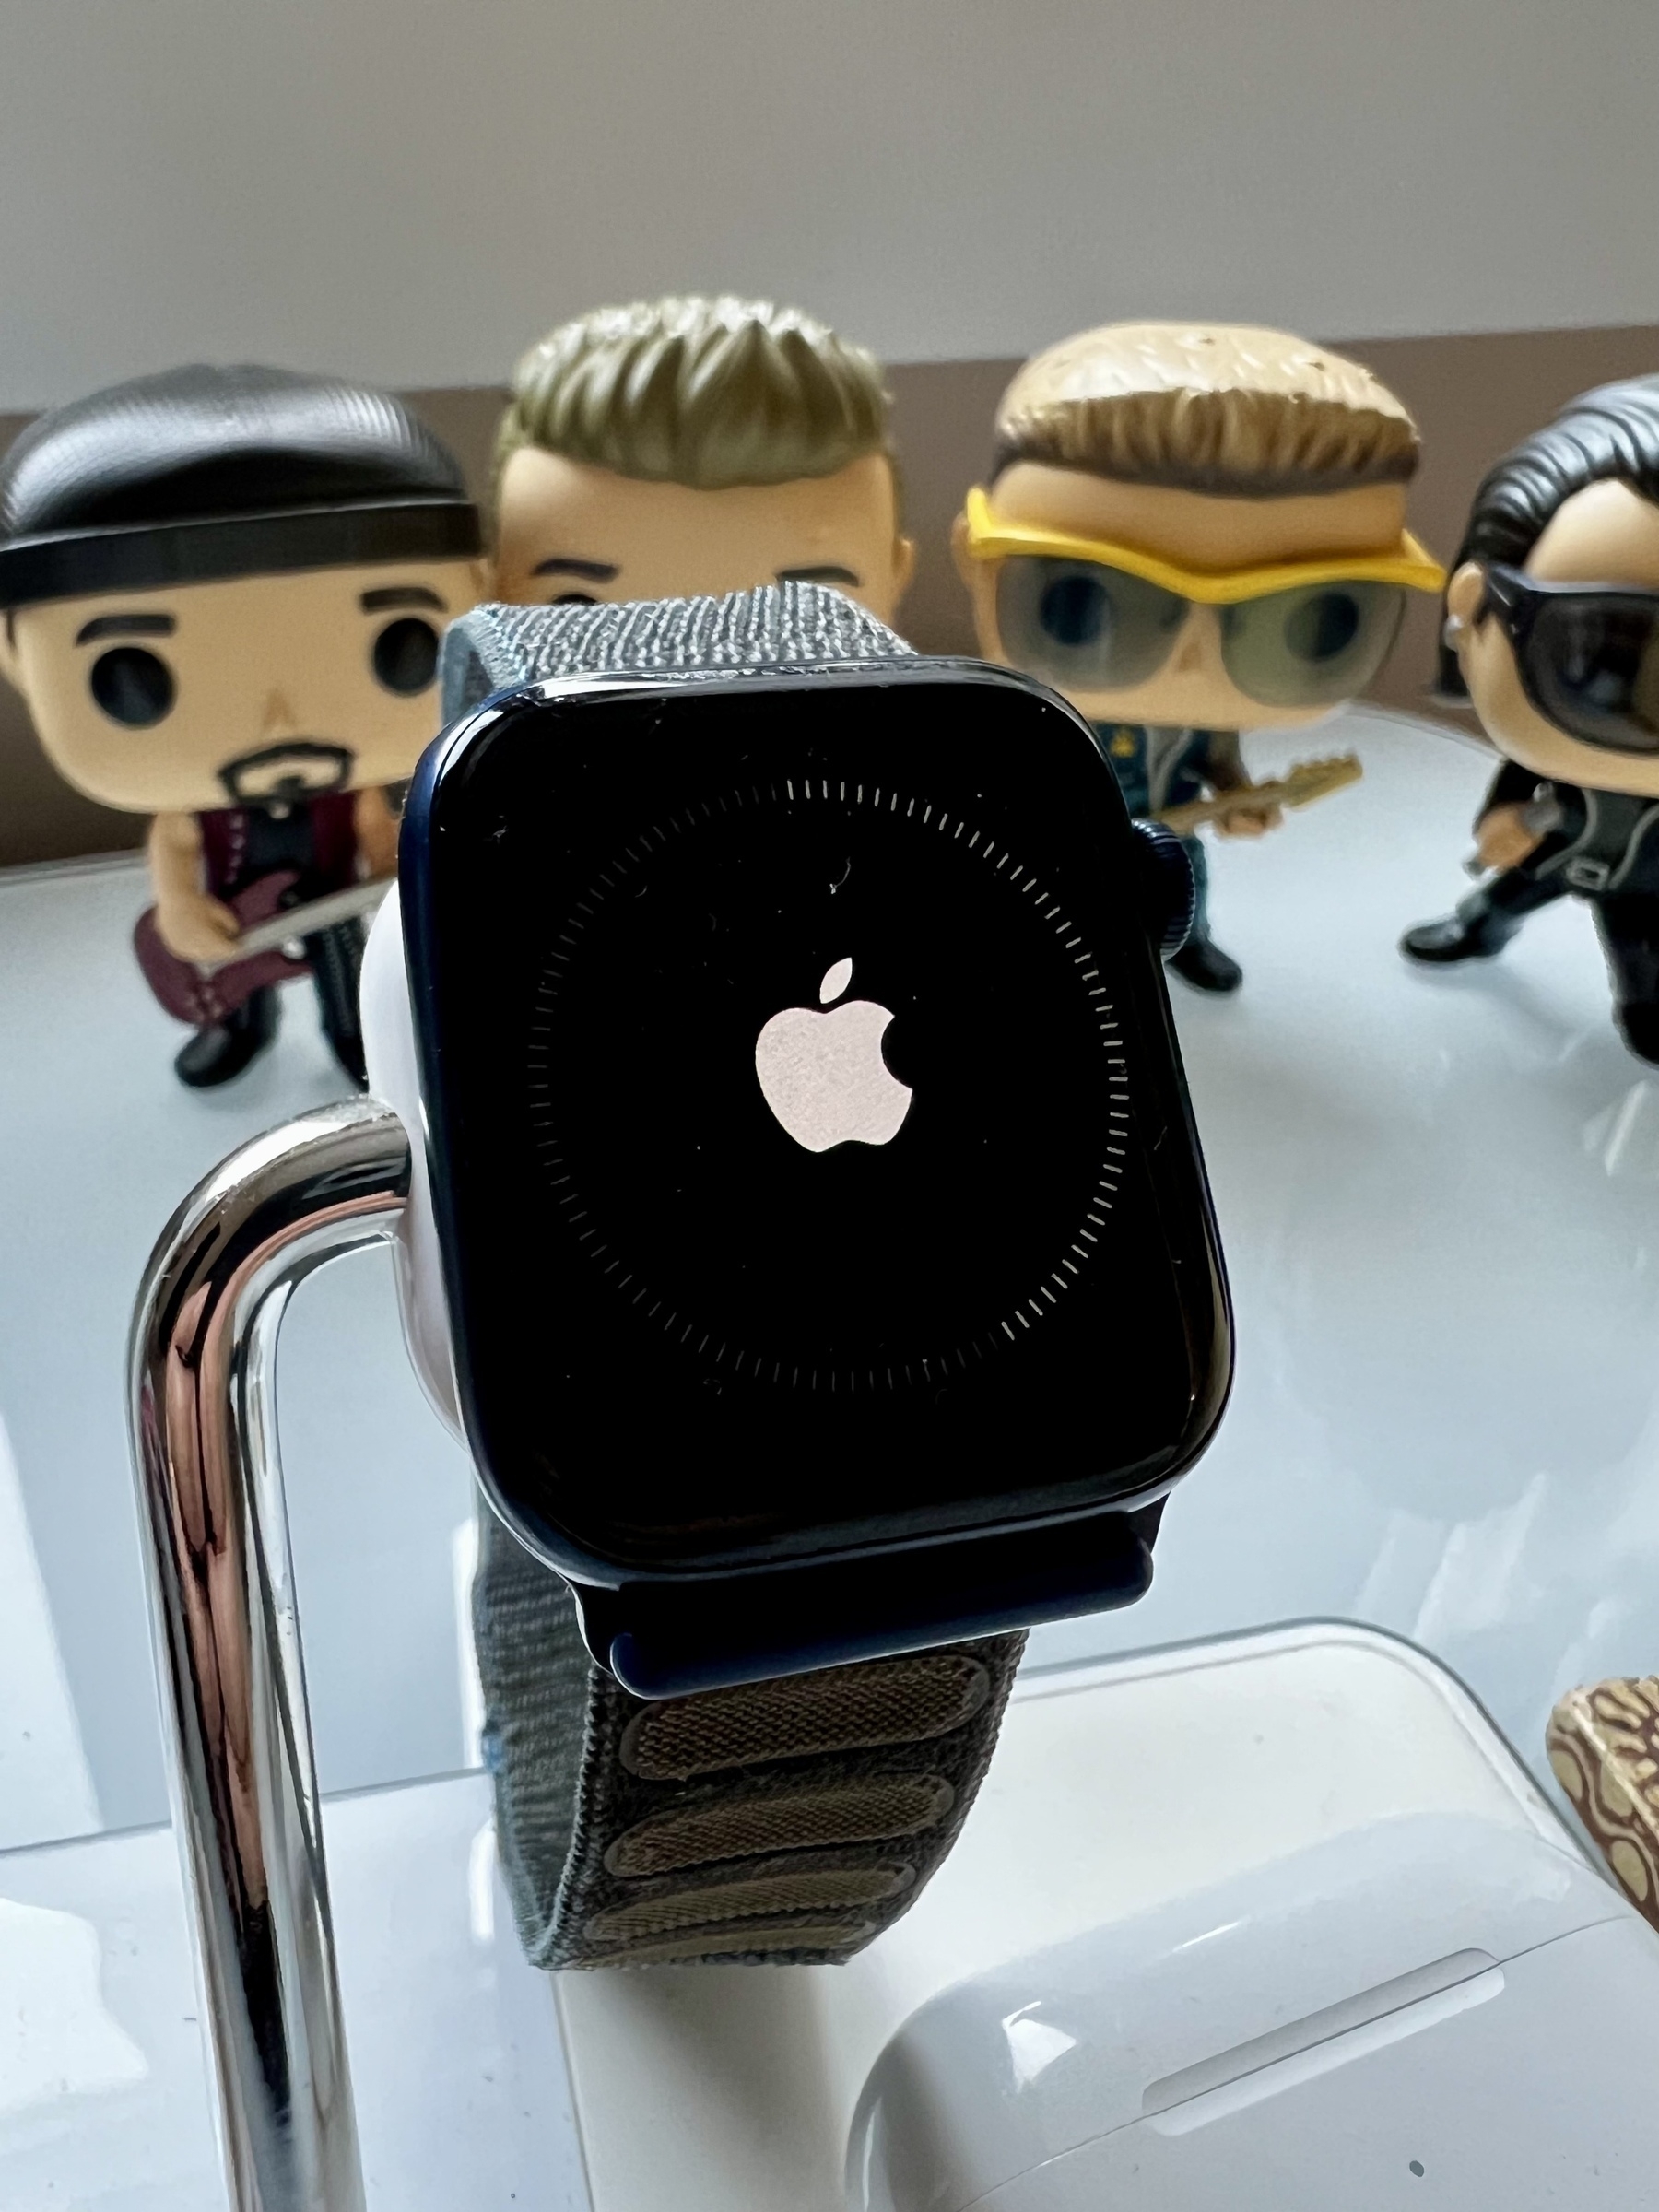 Apple Watch Series 6 updating to watchOS 10. Half way done. U2 Funko pop characters in the background. 